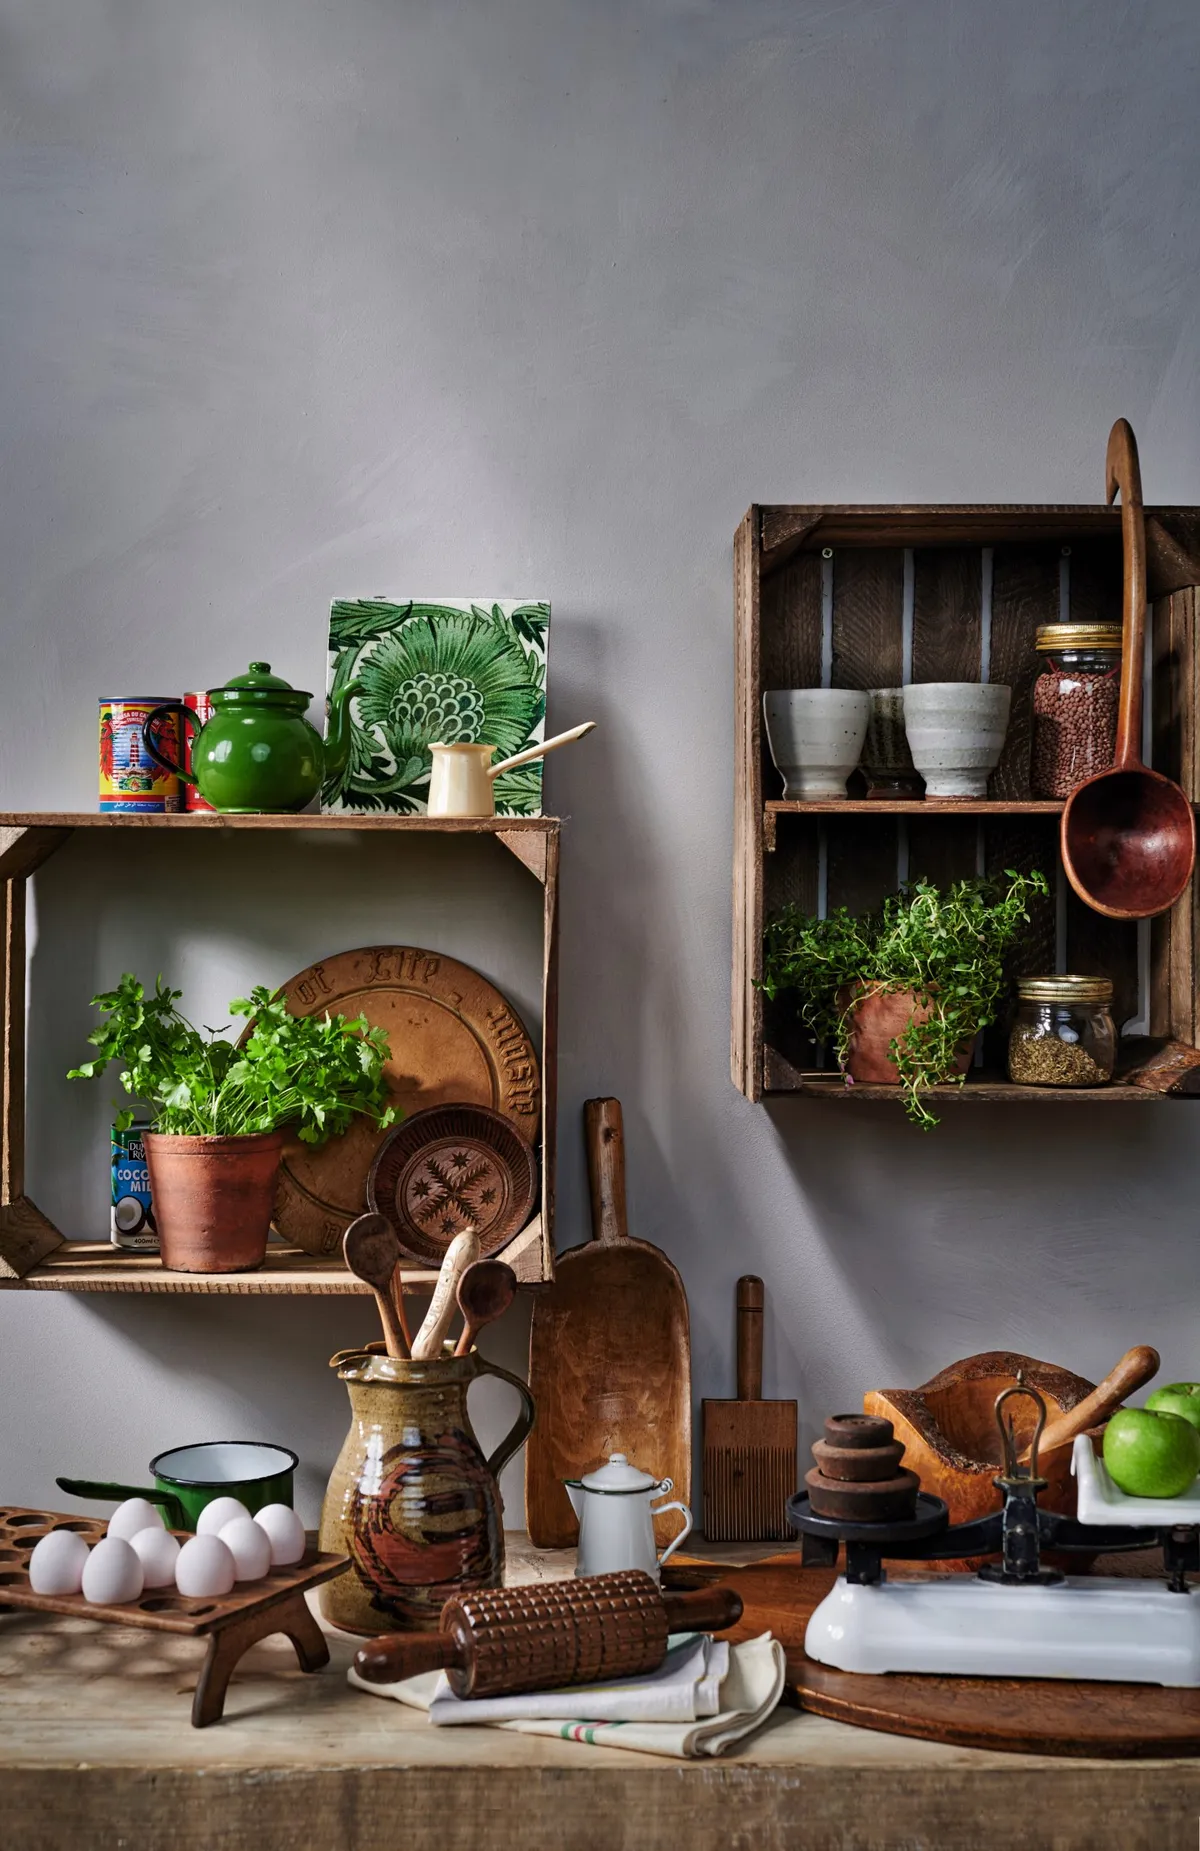 Upcycled old apple crates make charming shelves, either propped on another surface or hung on the wall. In a rustic kitchen they look wonderful filled with useful accessories and purely decorative pieces.